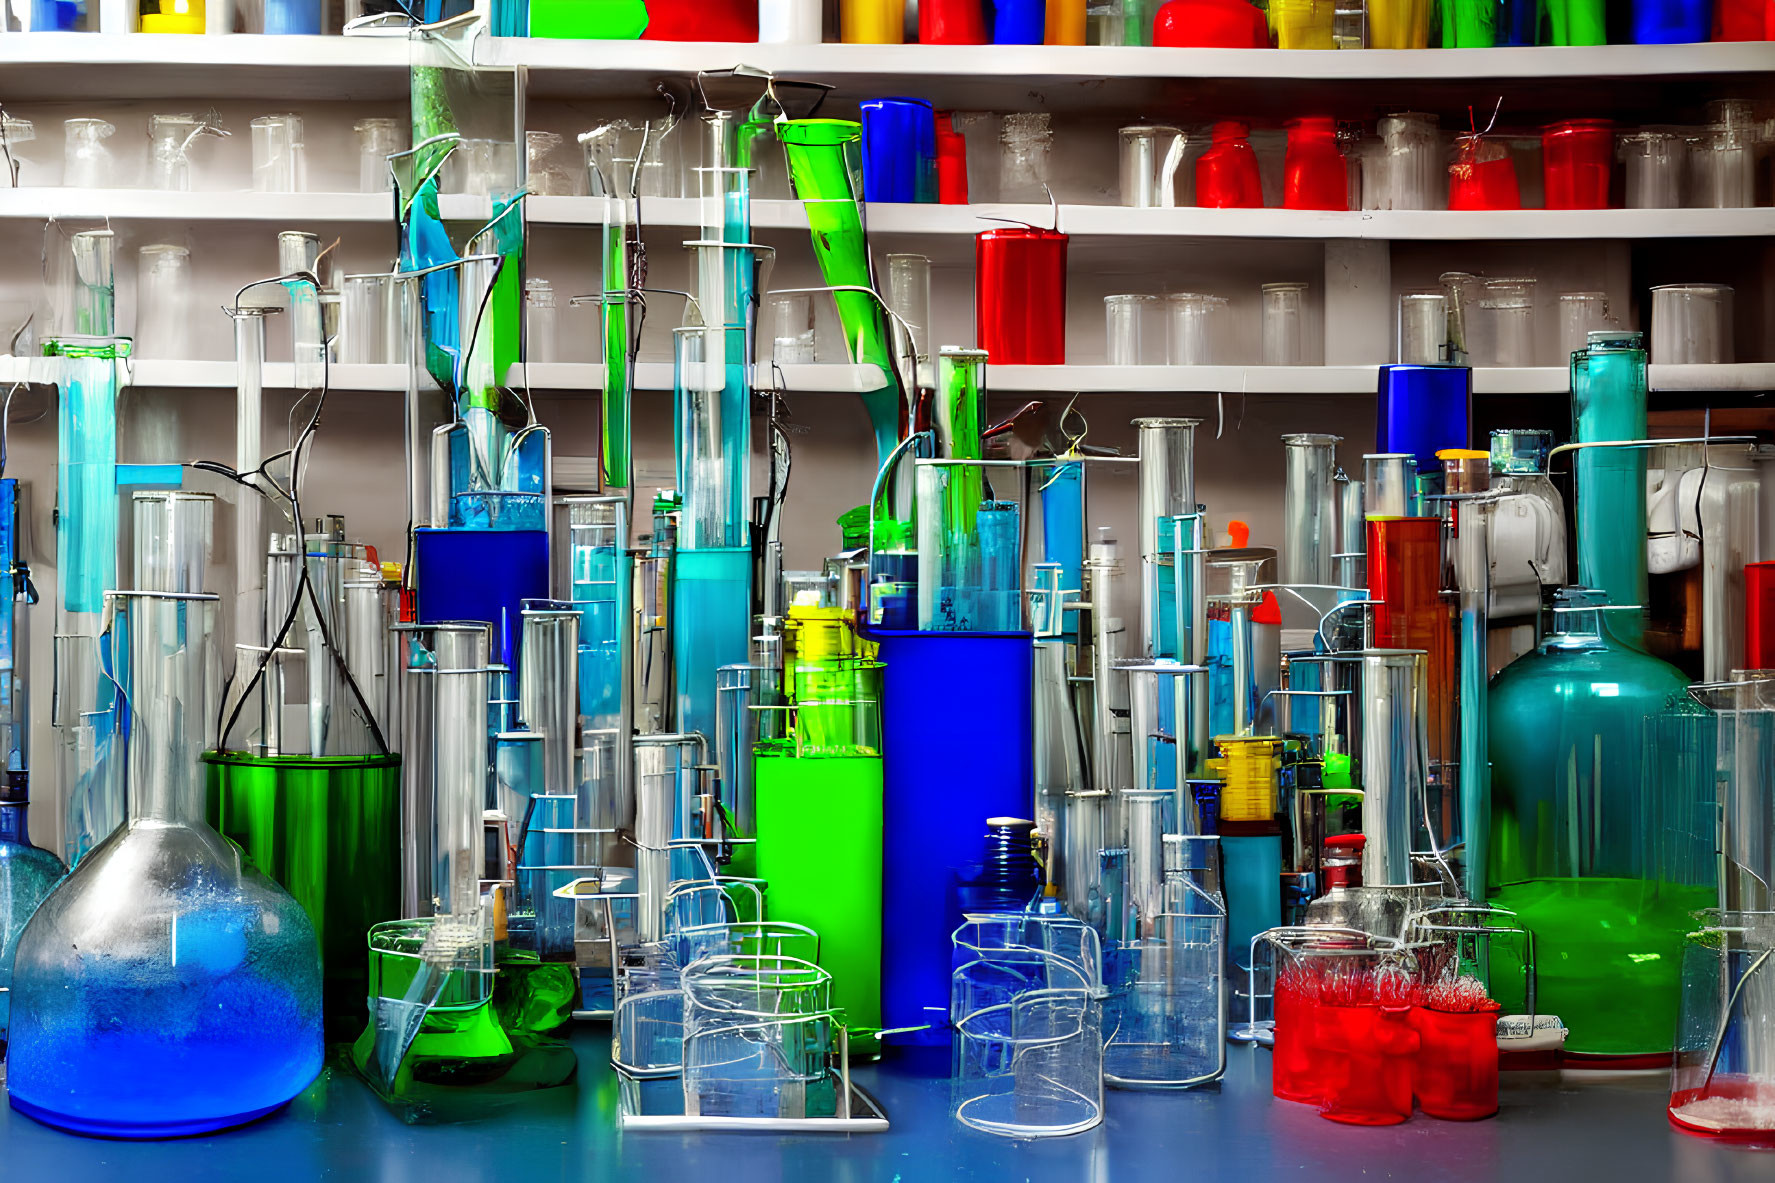 Vibrant scientific glassware and substances in a lab setting